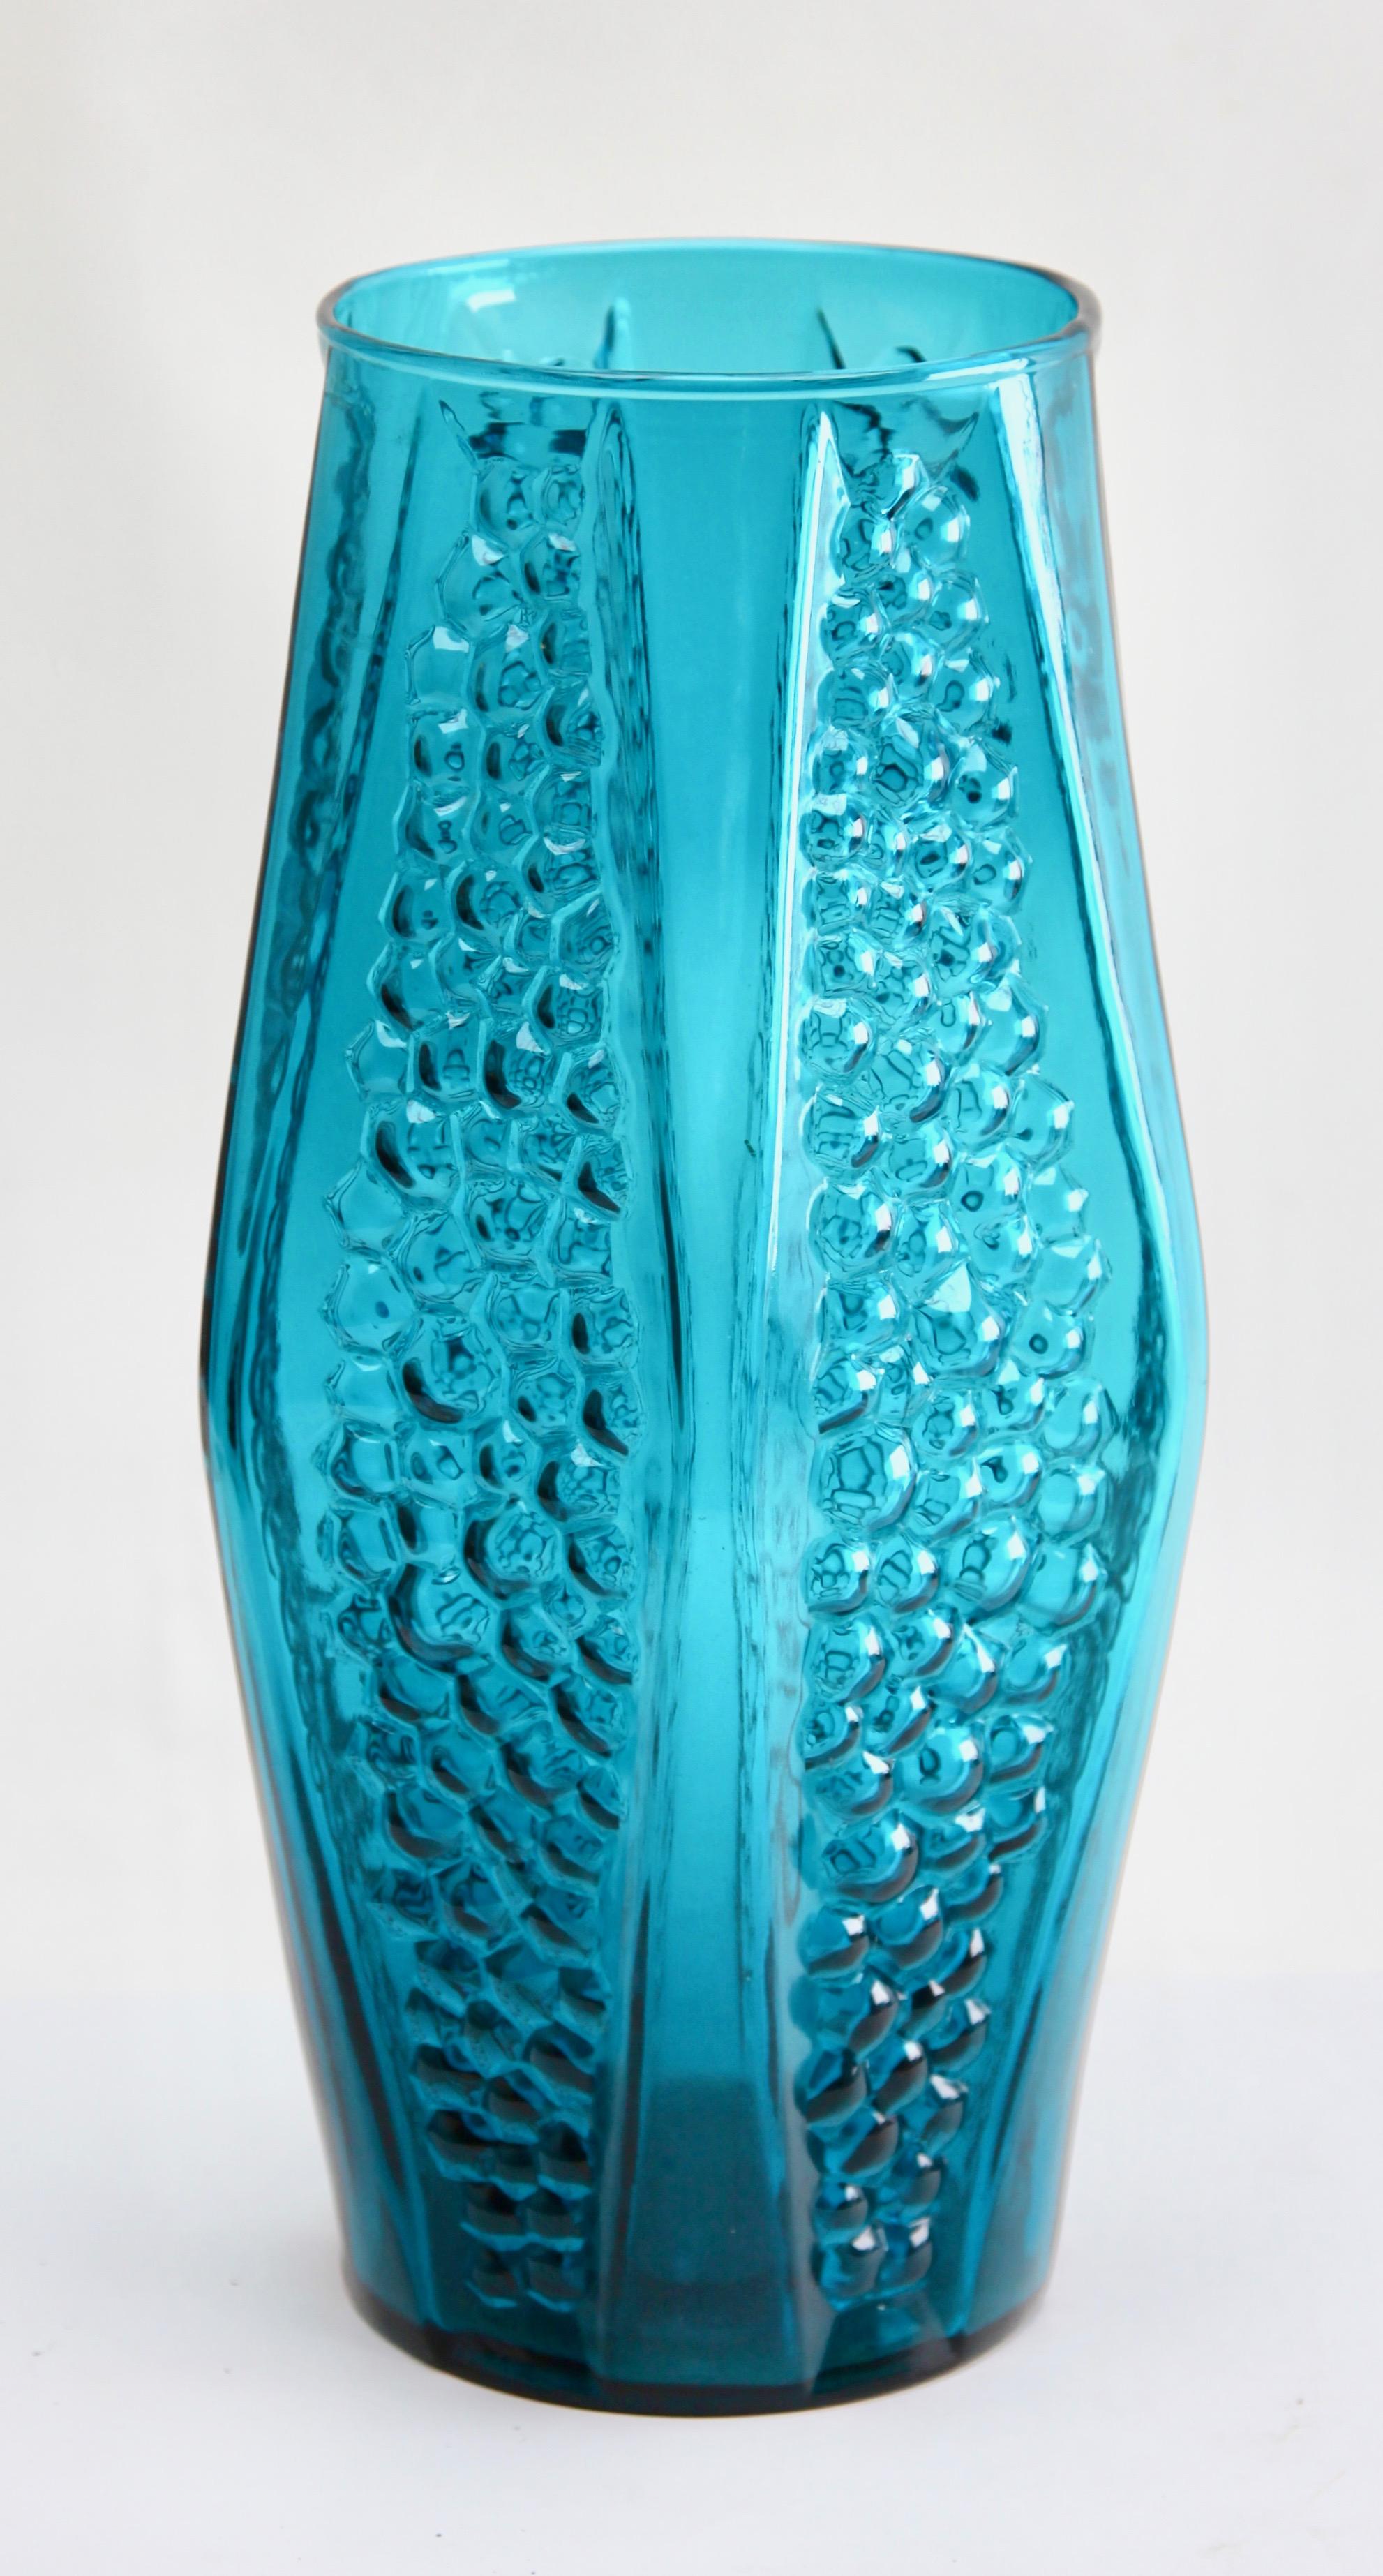 Stolle-Nieman 'Attributed' Hexagonal Vase with Bubbled Texture, 1970s In Good Condition For Sale In Verviers, BE